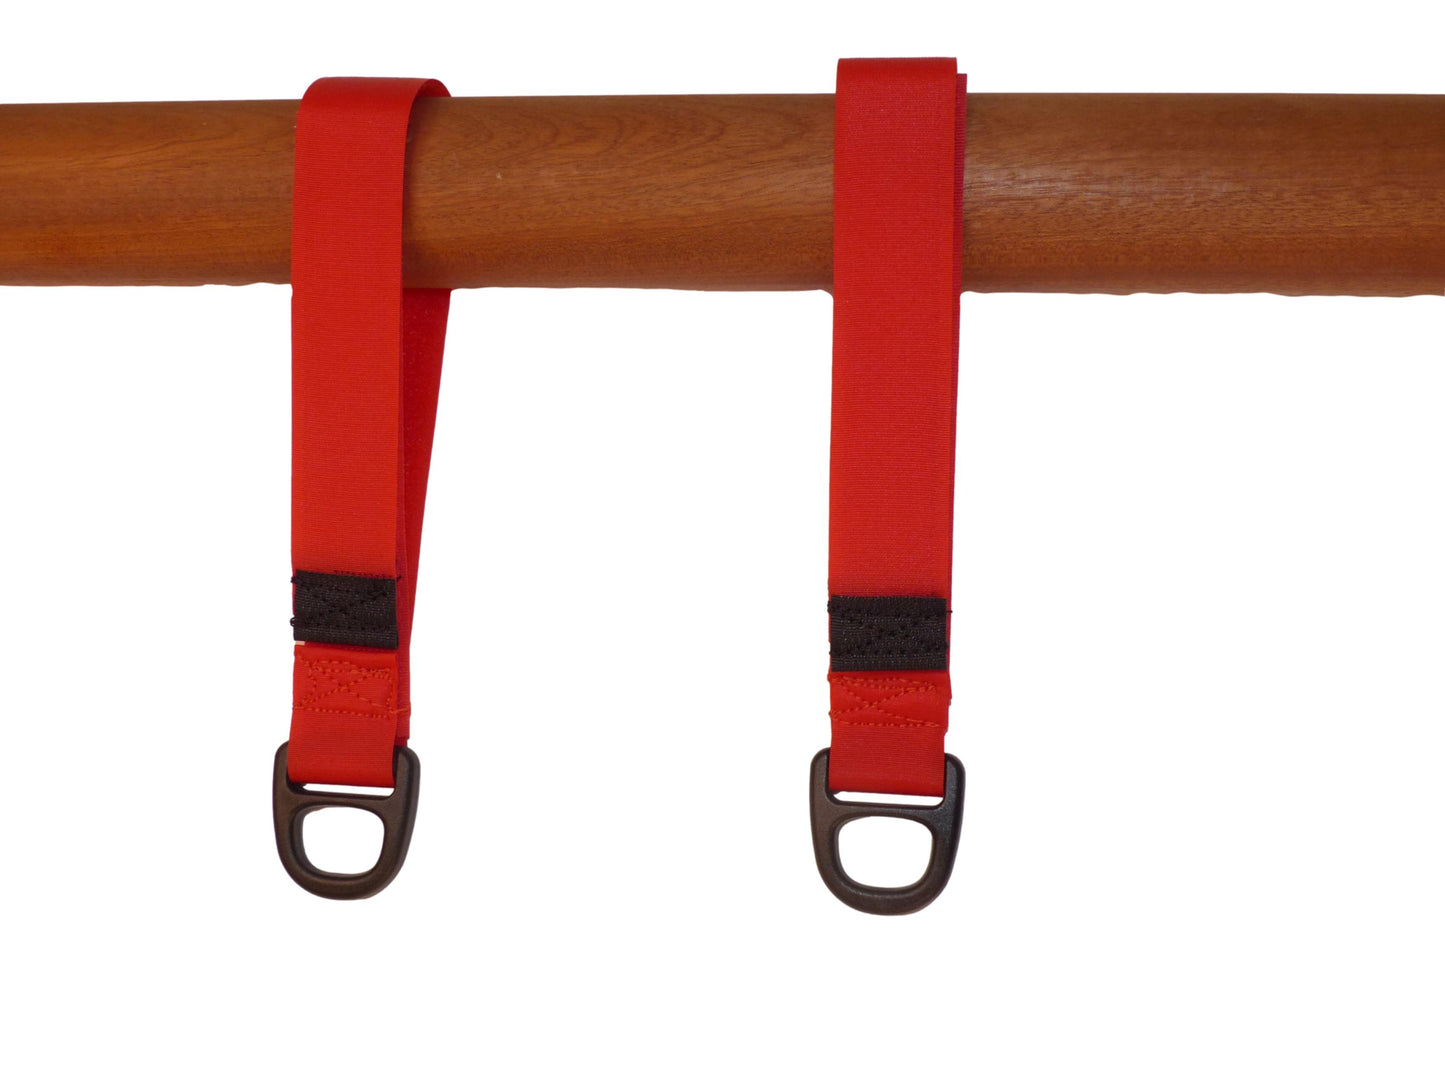 Benristraps 25mm Hook & Loop Tidy & Hang Strap with Plastic Ring (Pack of 2) in red